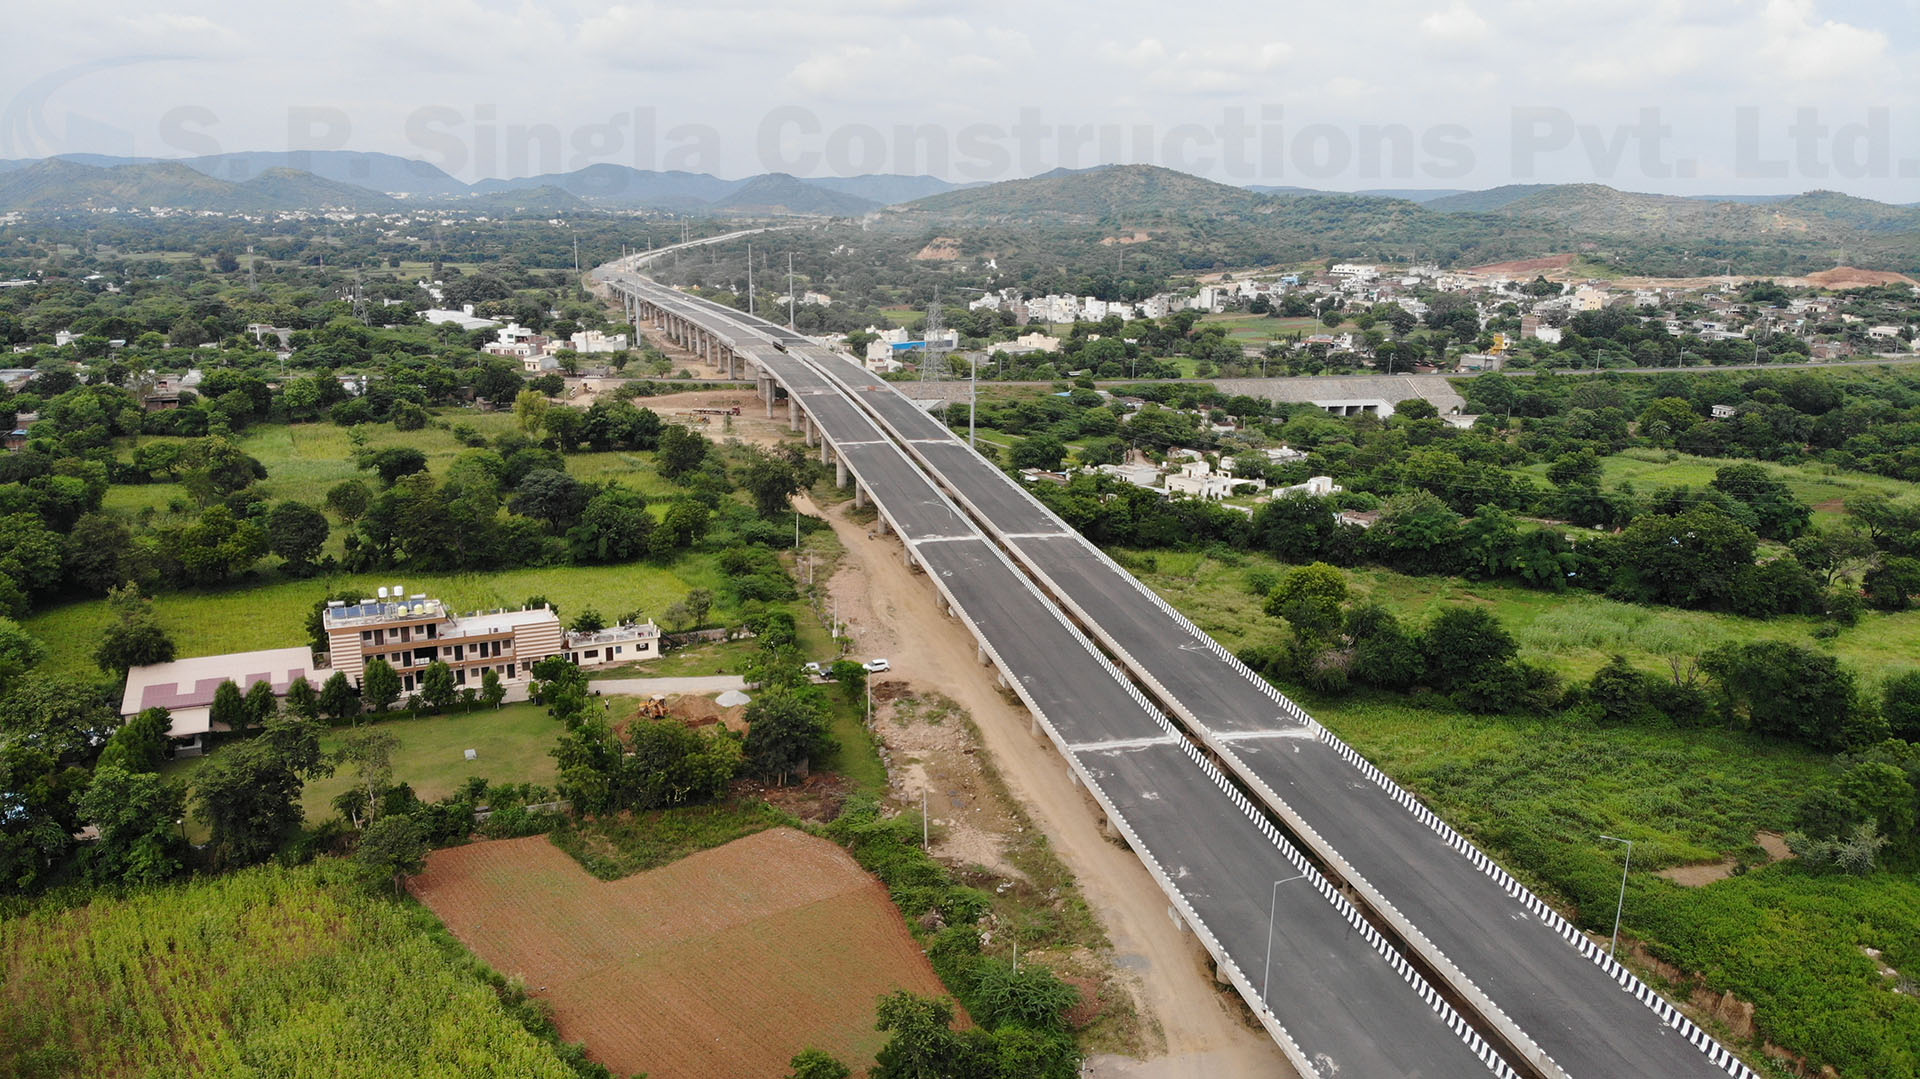 Structure works on 23.883 Km Long, 6 Lane Udaipur Bypass under NHDP in Rajasthan